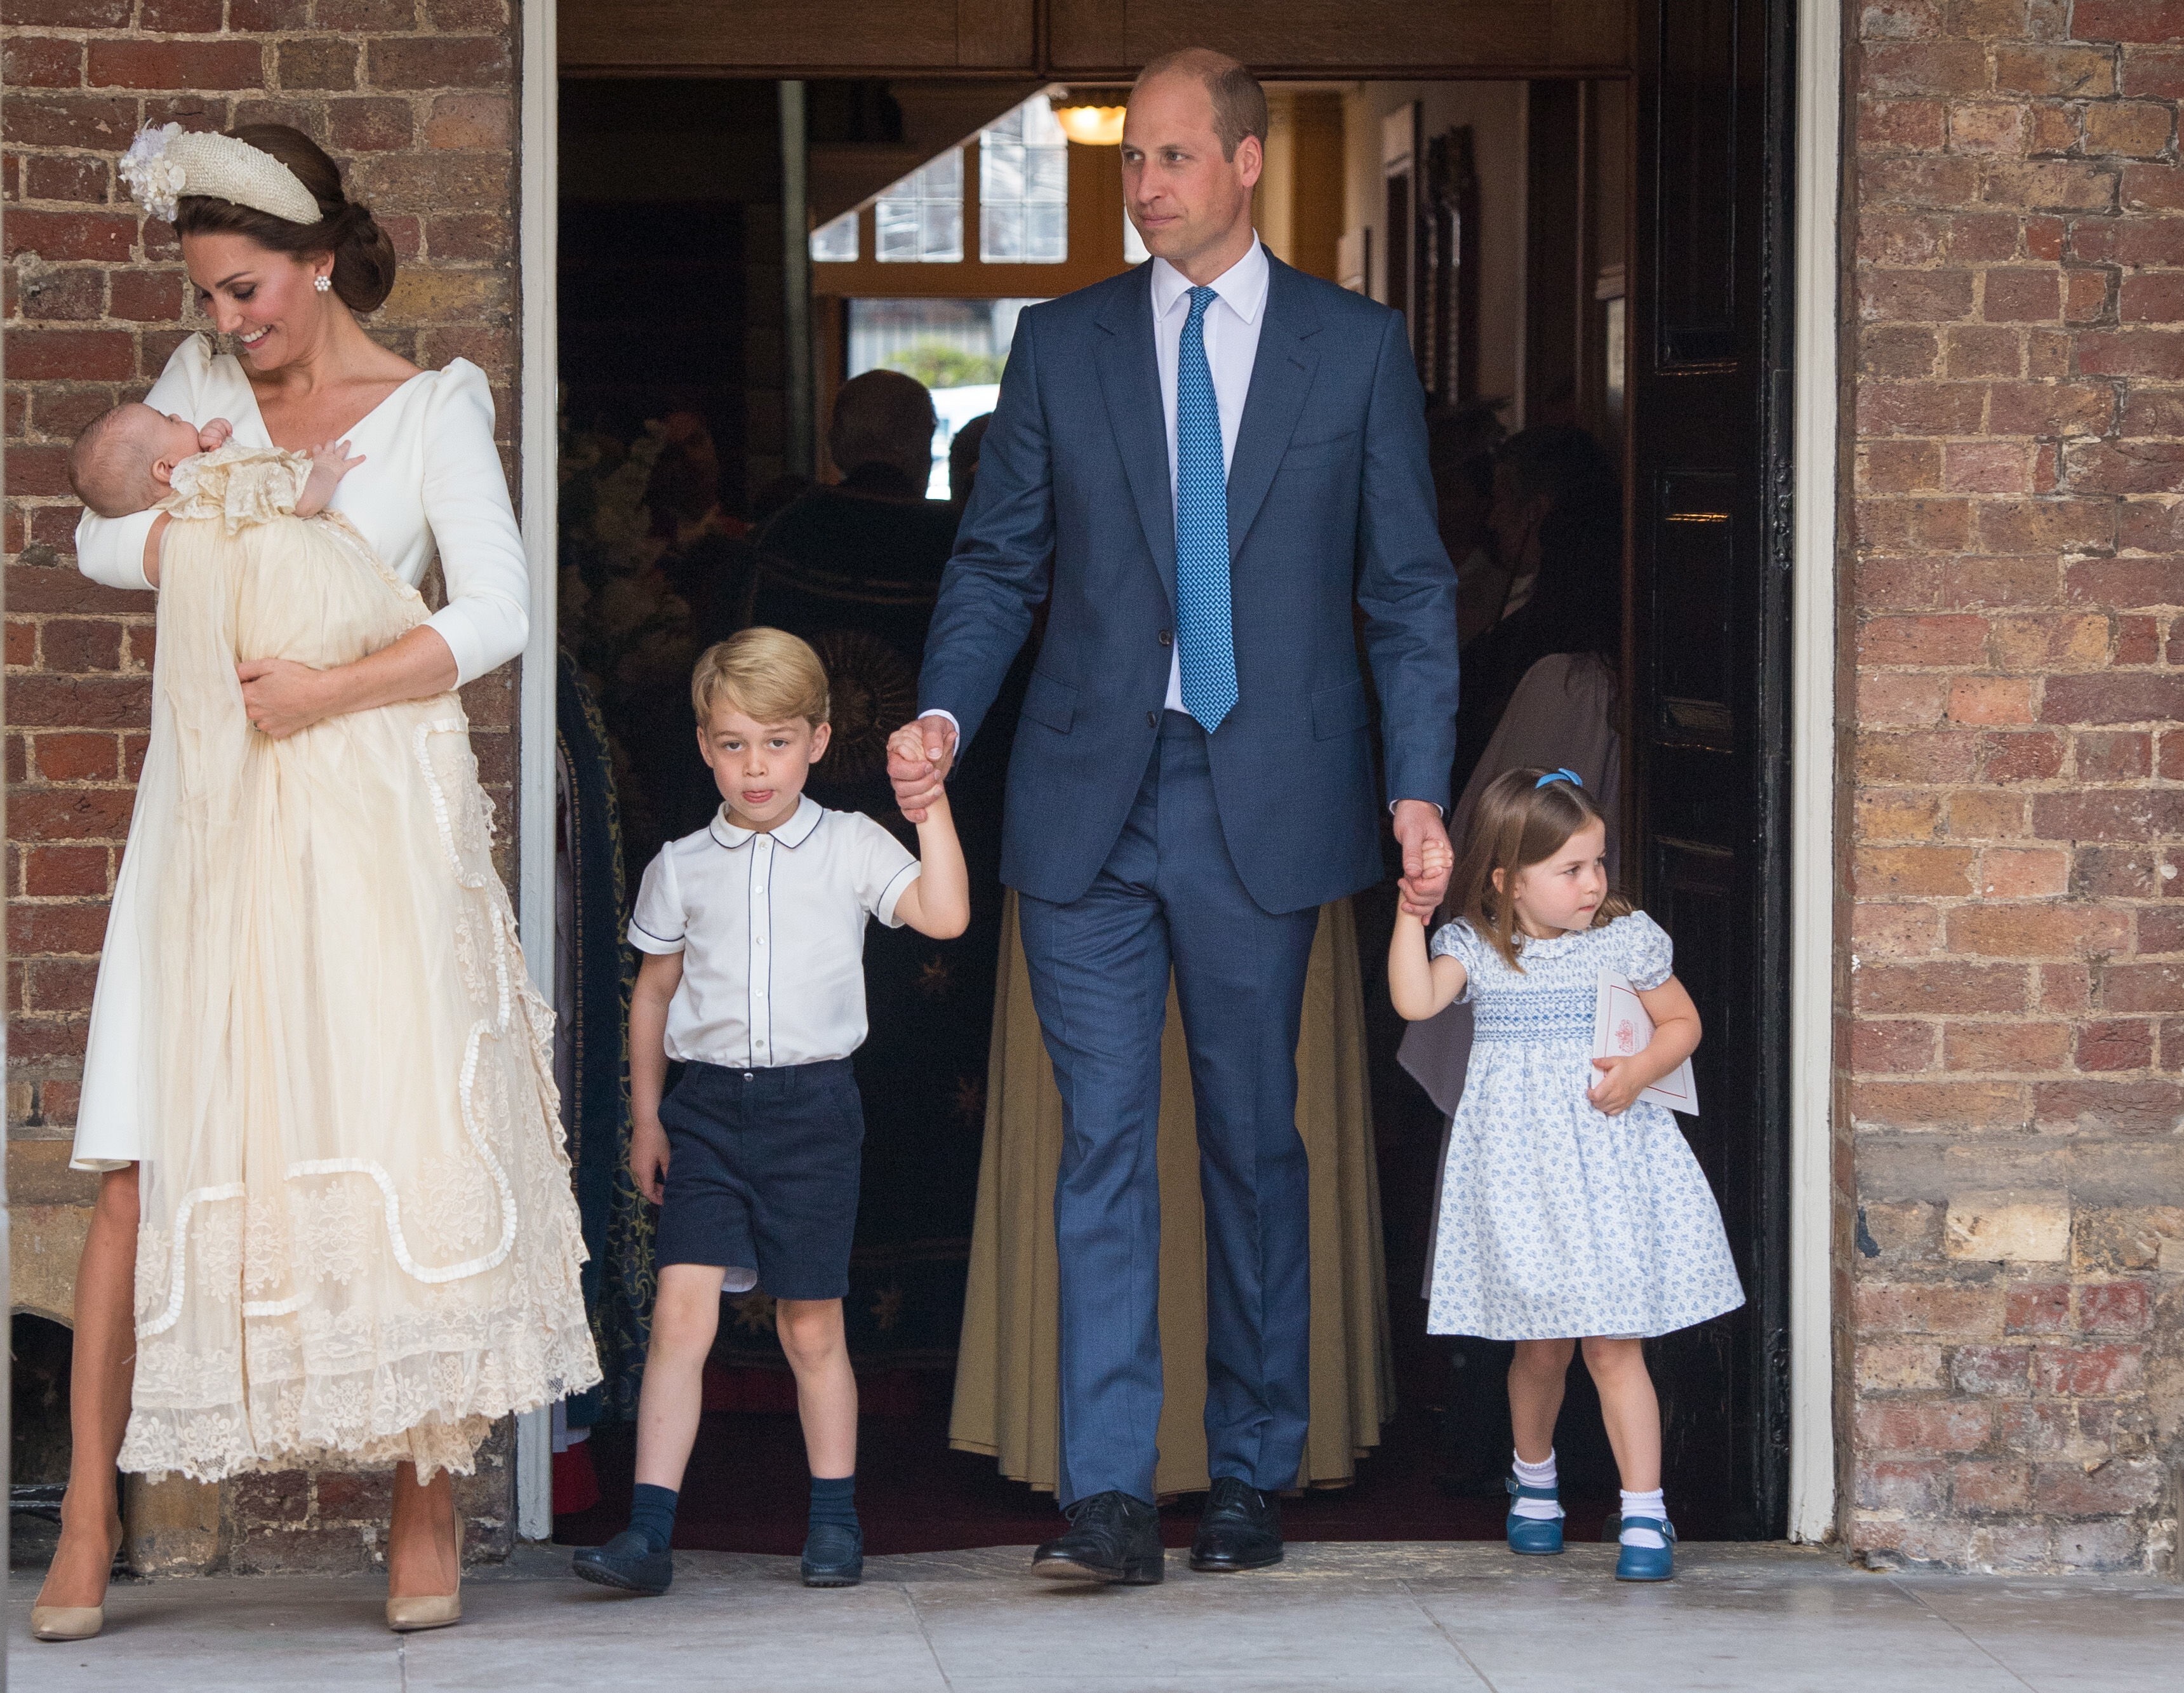 Catherine (left), the Duchess of Cambridge, holds Prince Louis as she and her family – husband Prince William (second right) and their children Prince George and Princess Charlotte – attend the christening of Prince Louis at St. James’s Palace in London. Photo: EPA-EFE